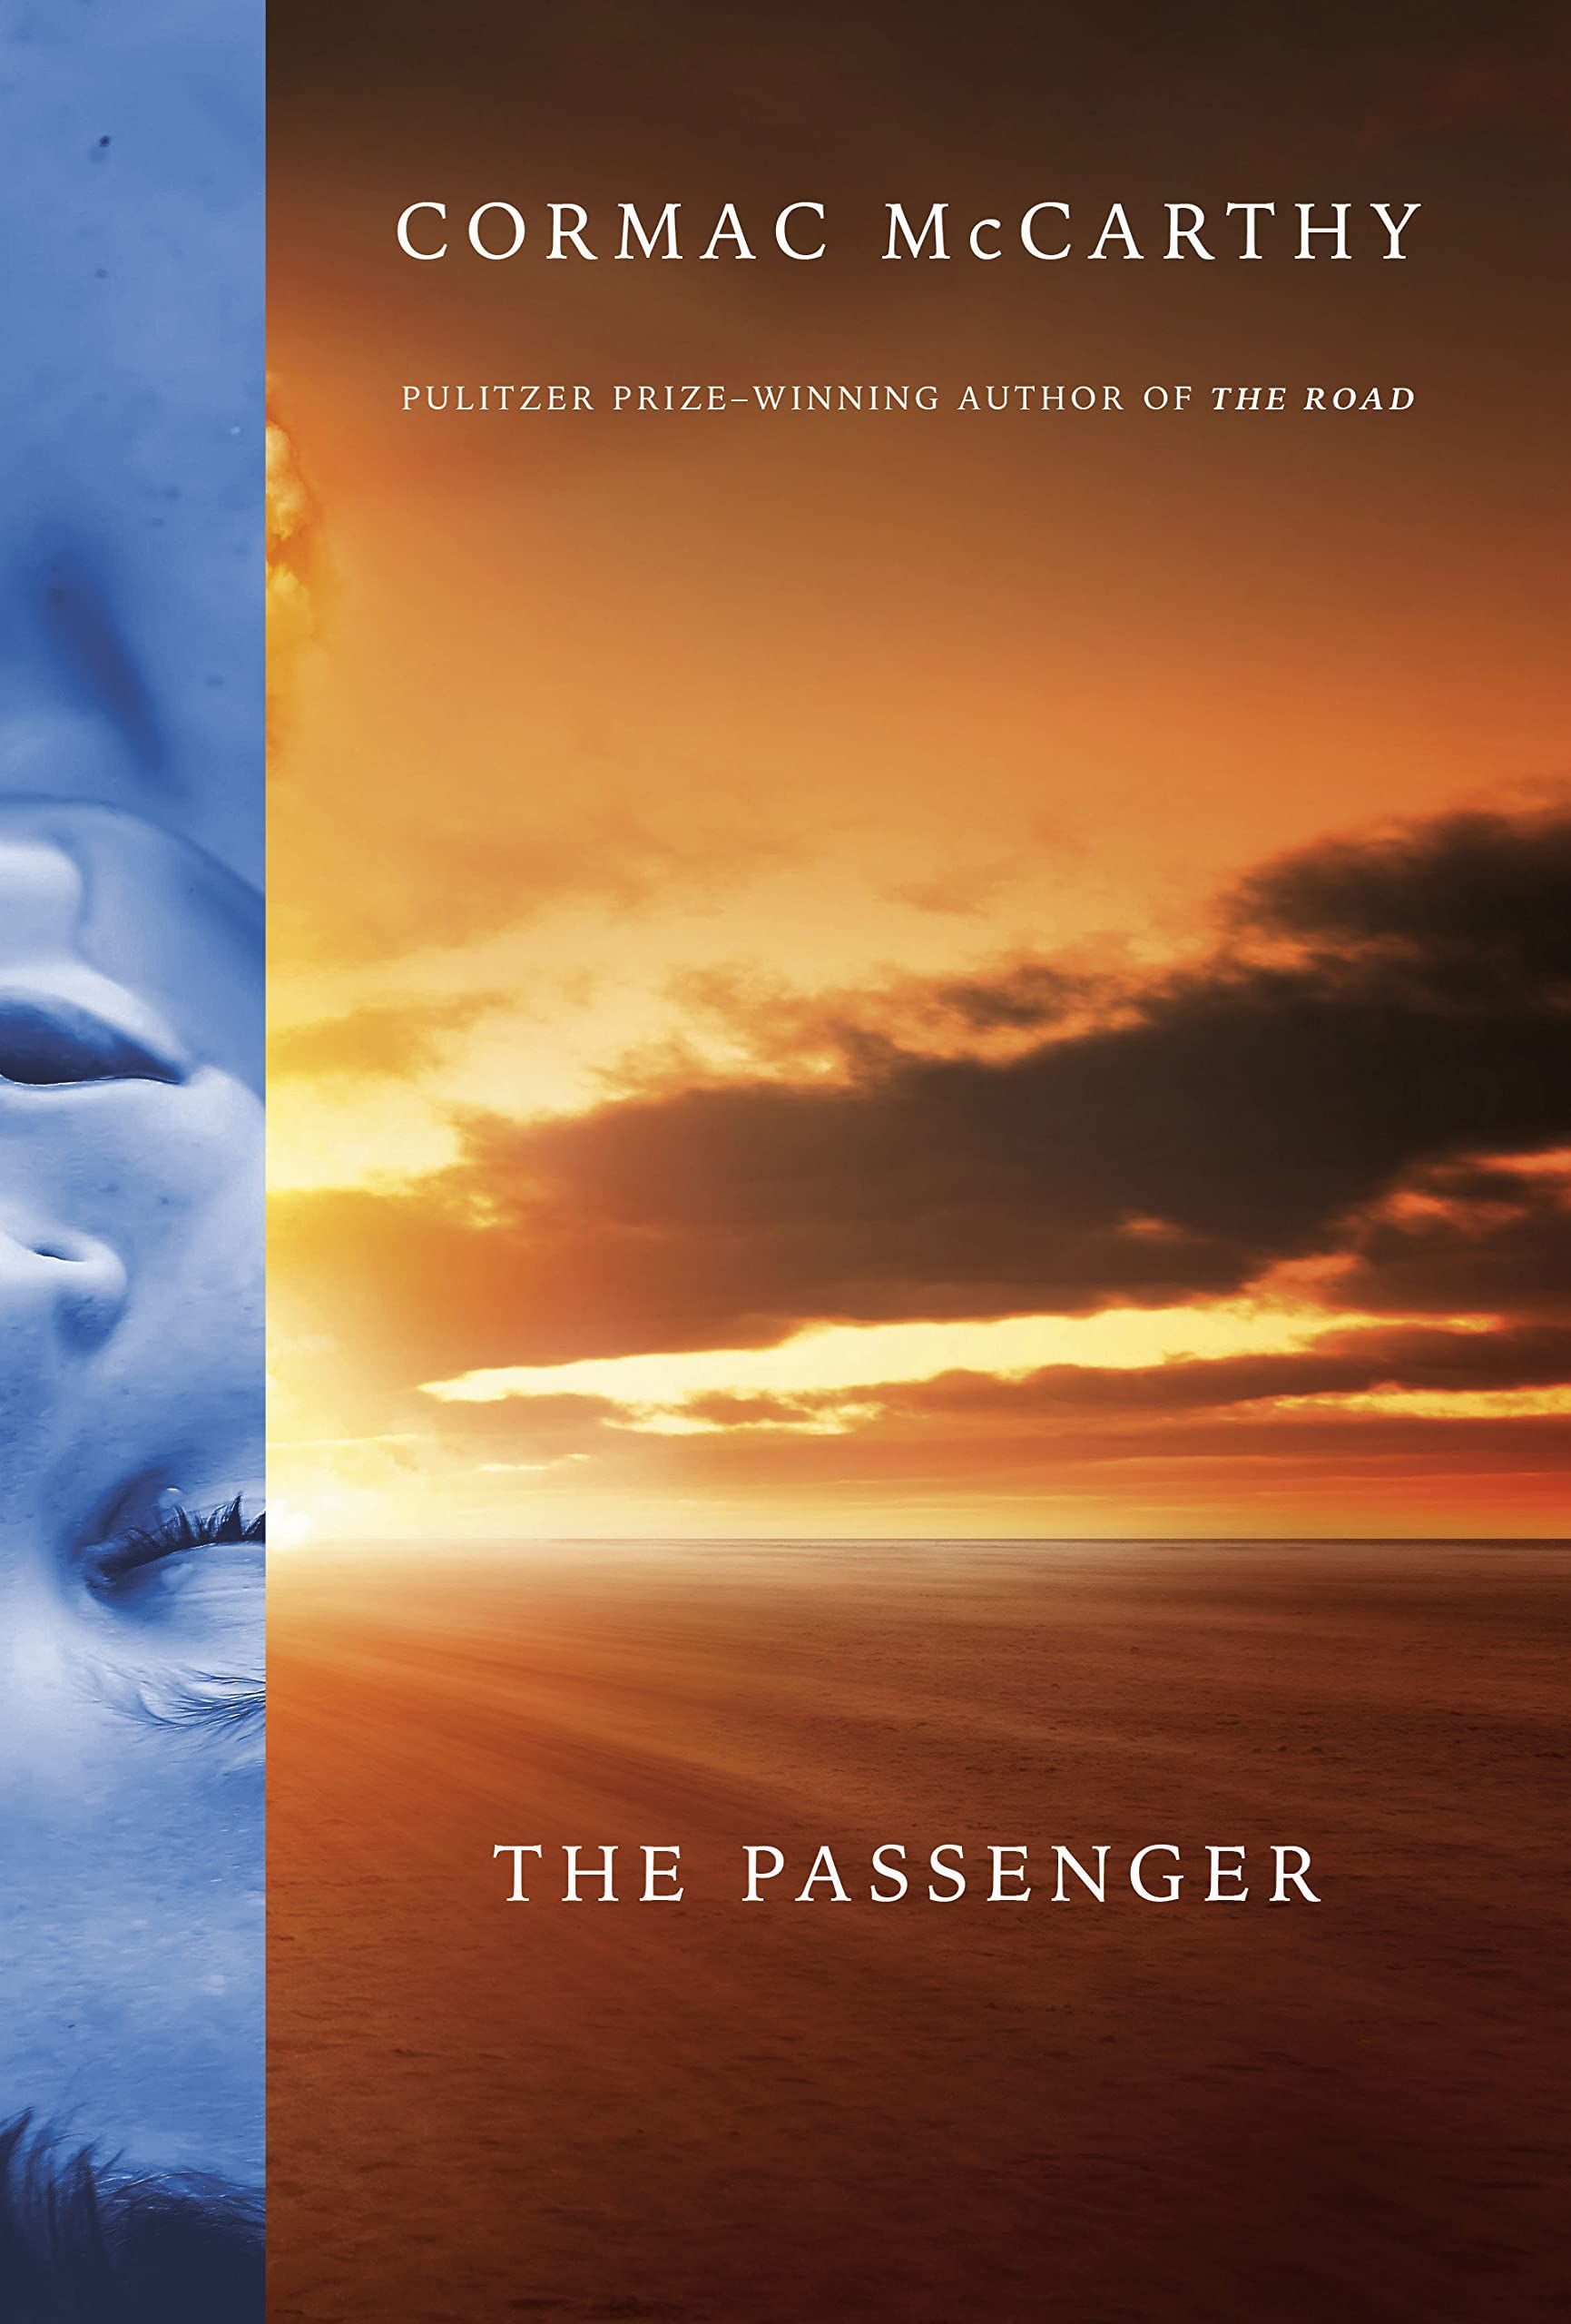 No Prayer for Such a Thing: On Cormac McCarthy’s “The Passenger”